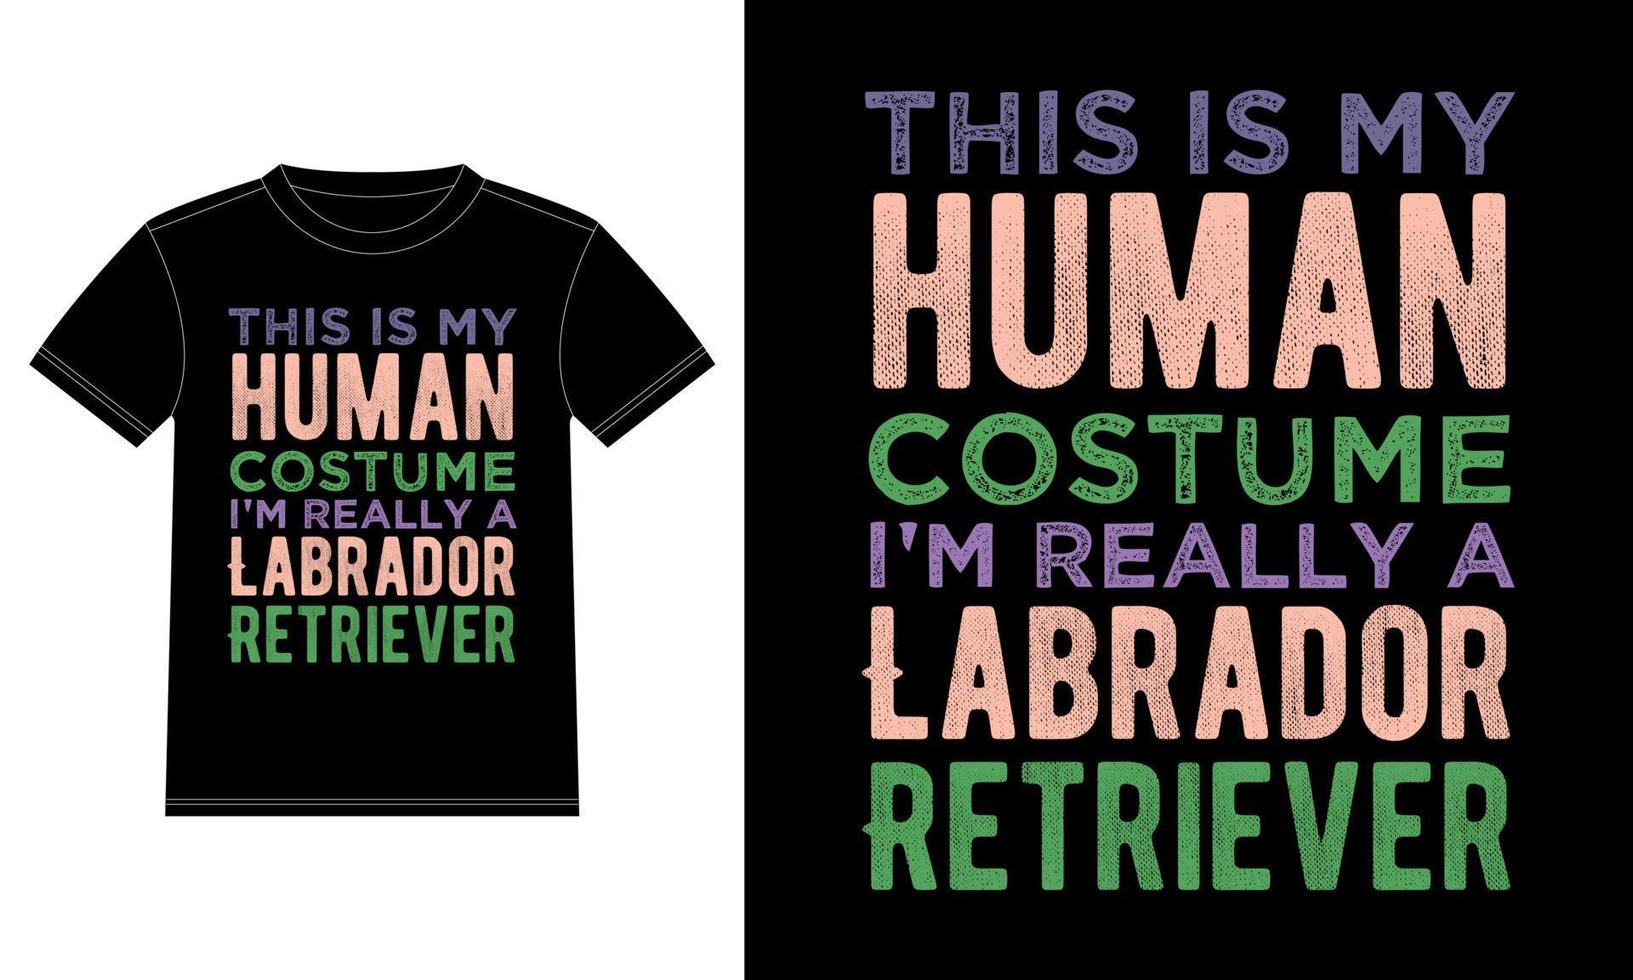 This is My Human Costume I'm Really A Labrador Retriever Funny Halloween Typography T-Shirt vector